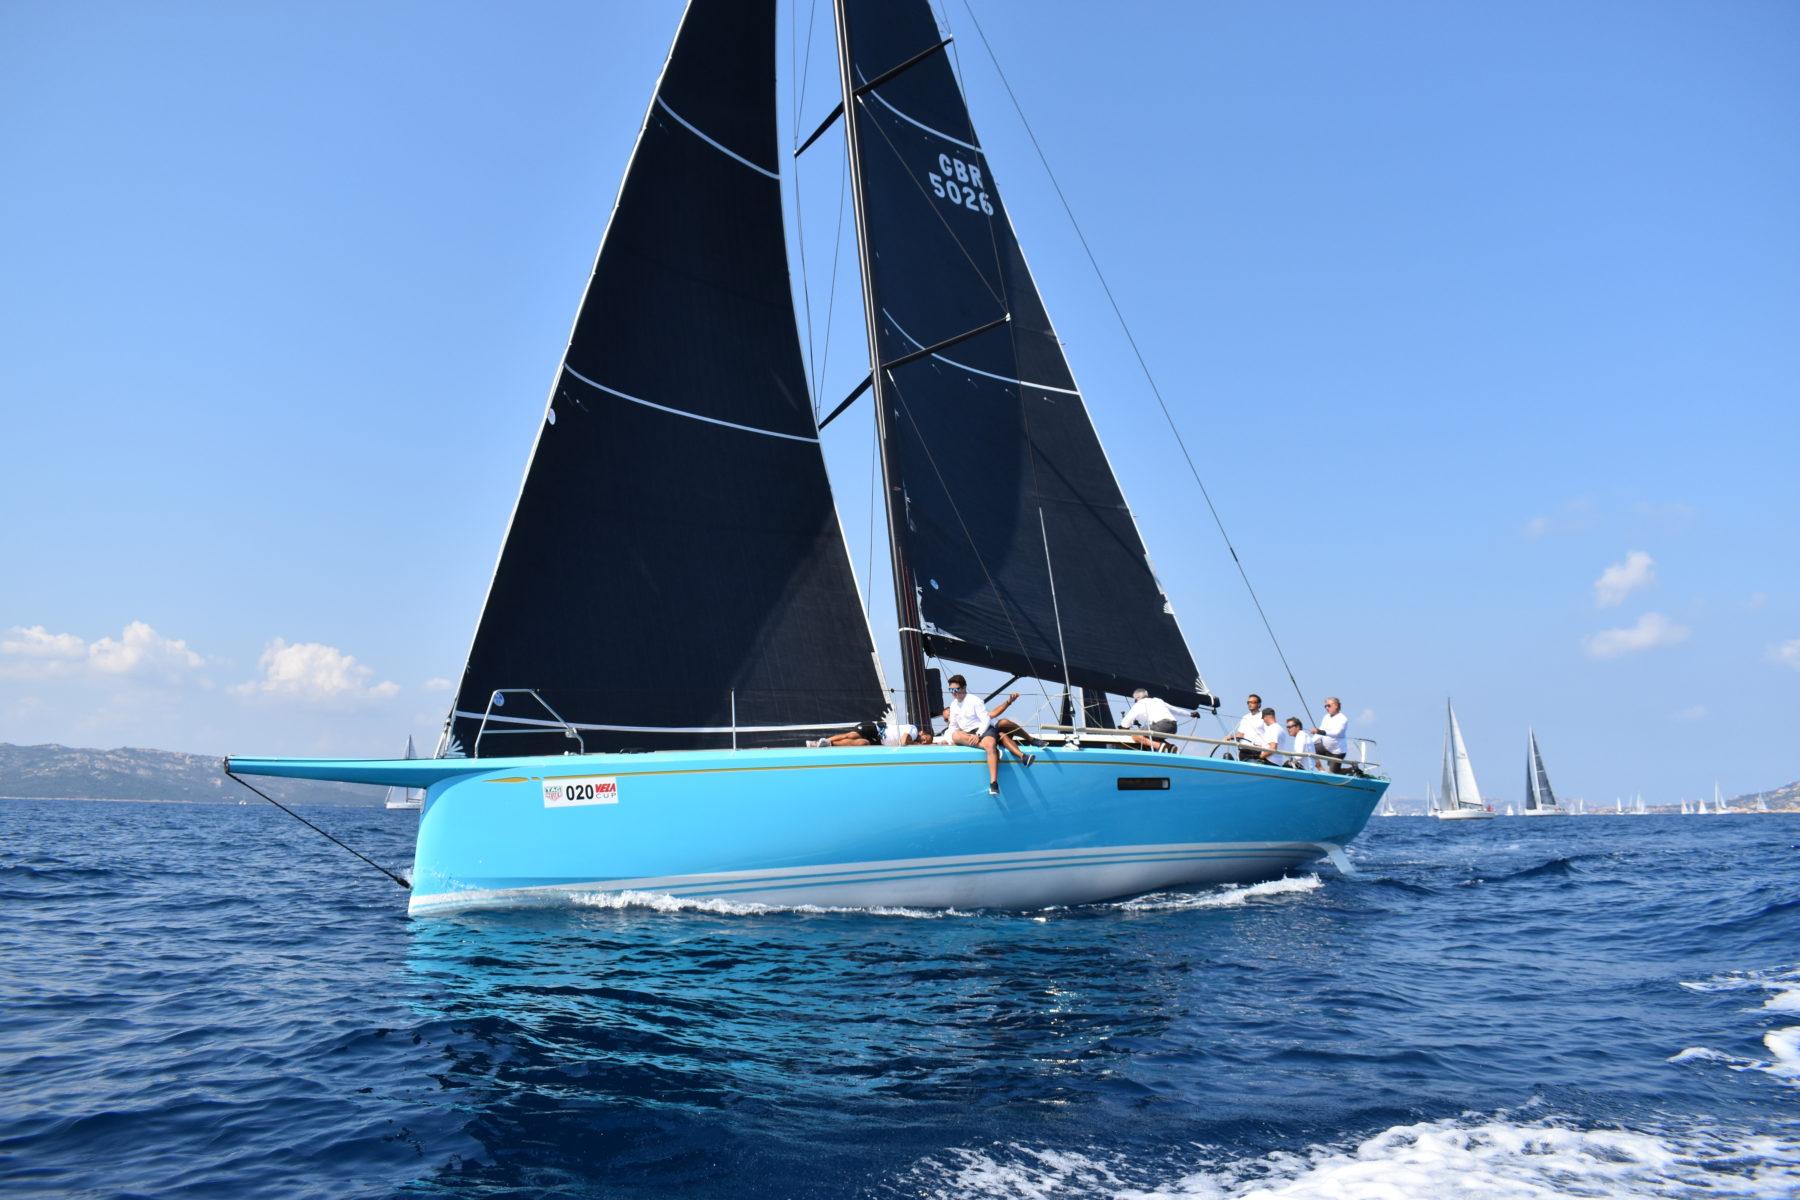 Real time victory for YCCS member Stronati at Vela Cup - News - Yacht Club Costa Smeralda